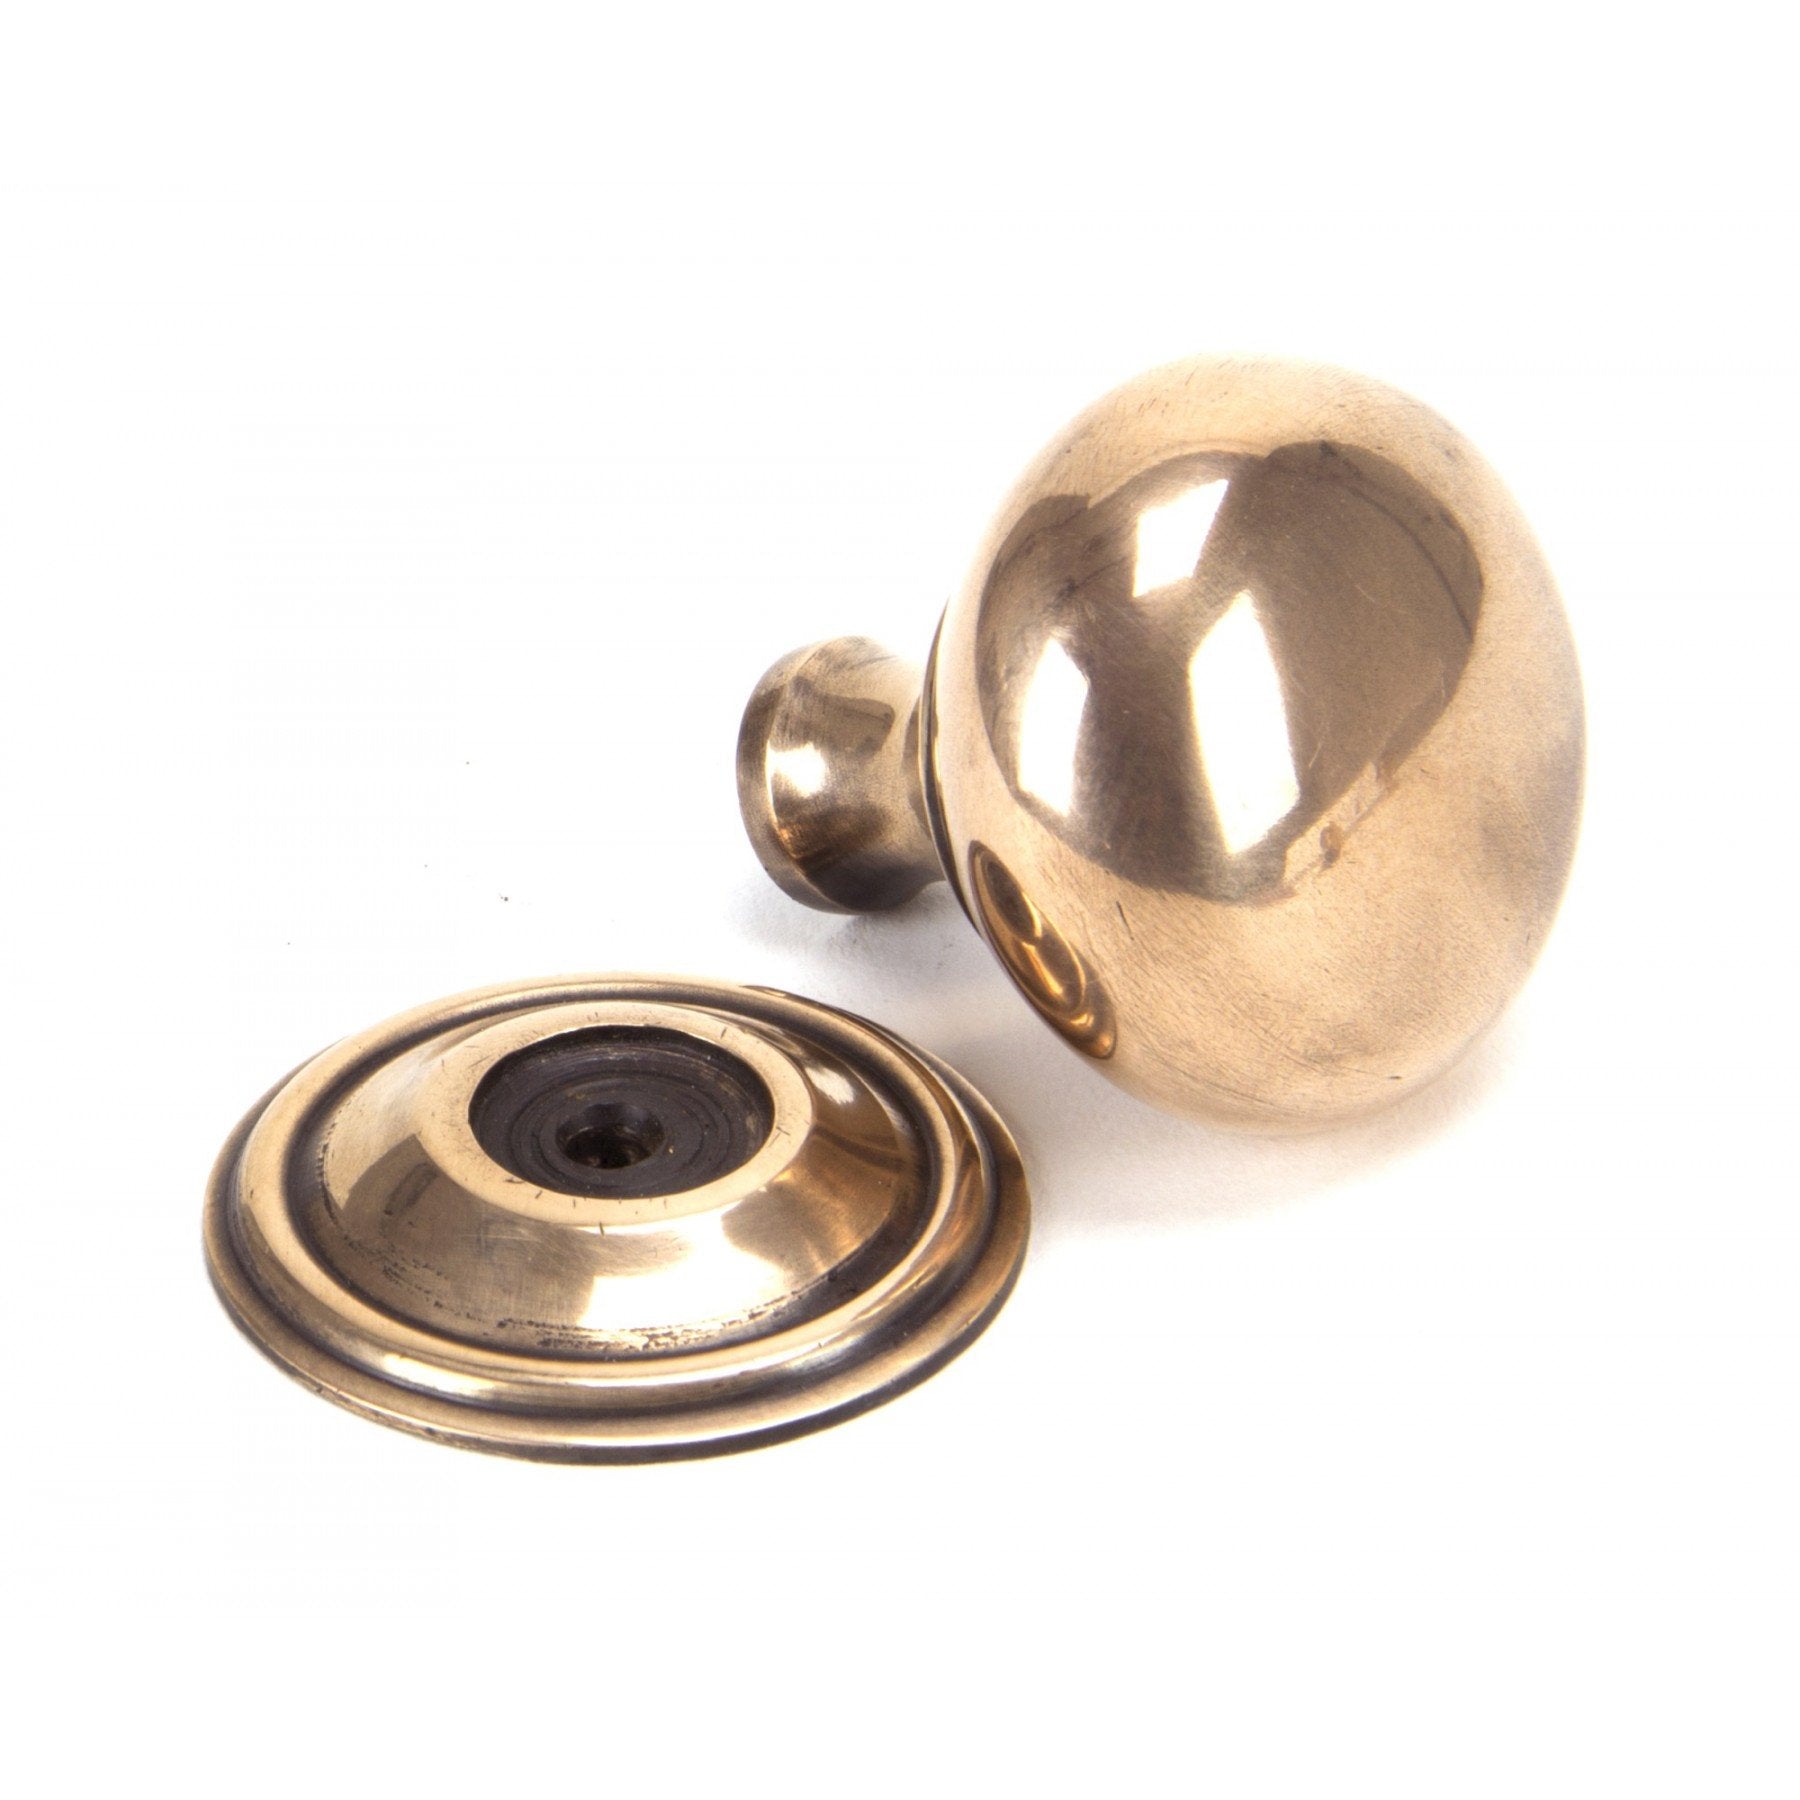 From The Anvil Polished Bronze Mushroom Cabinet Knob - Large